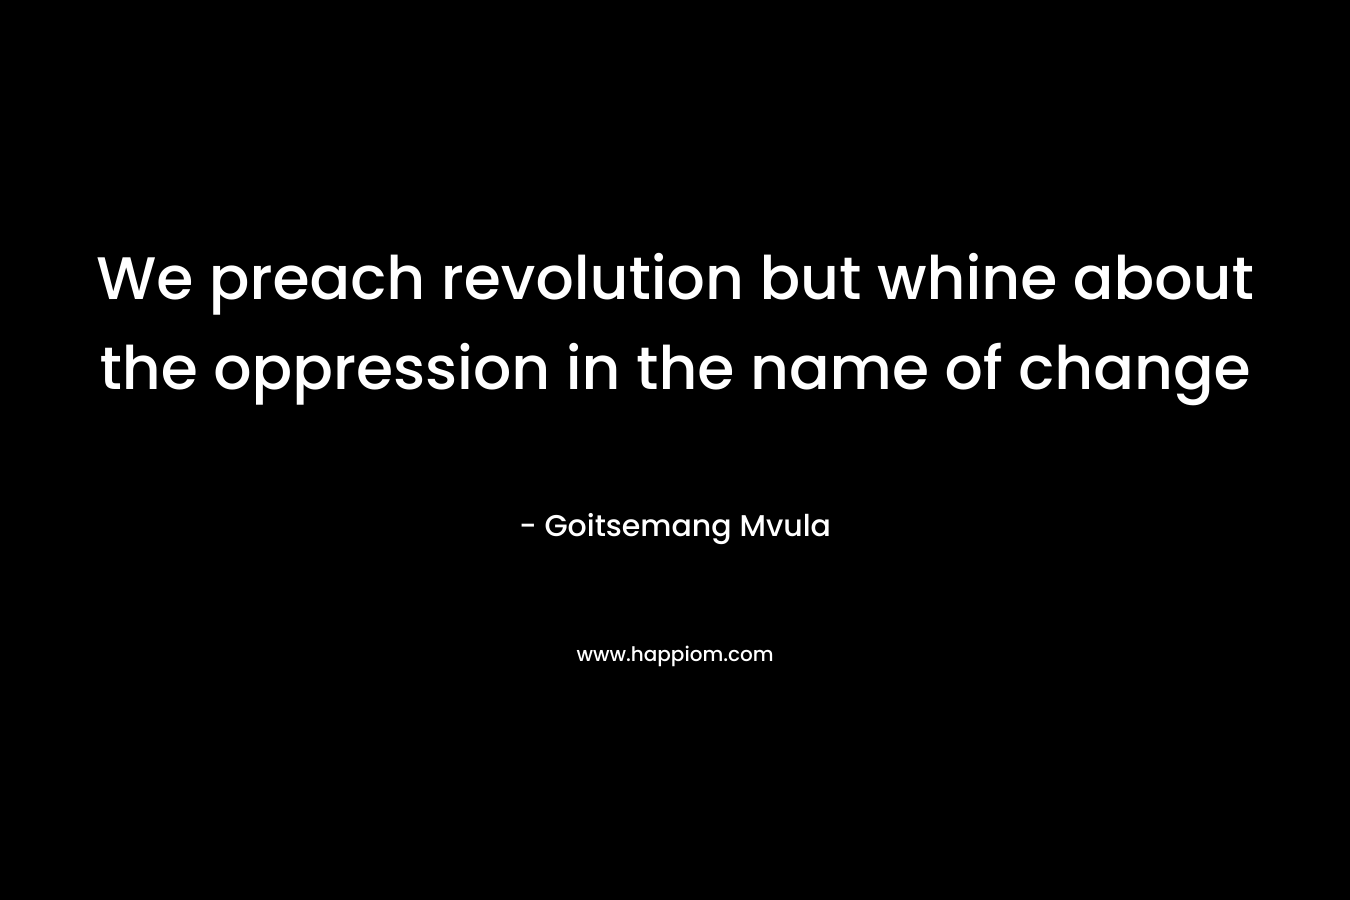 We preach revolution but whine about the oppression in the name of change